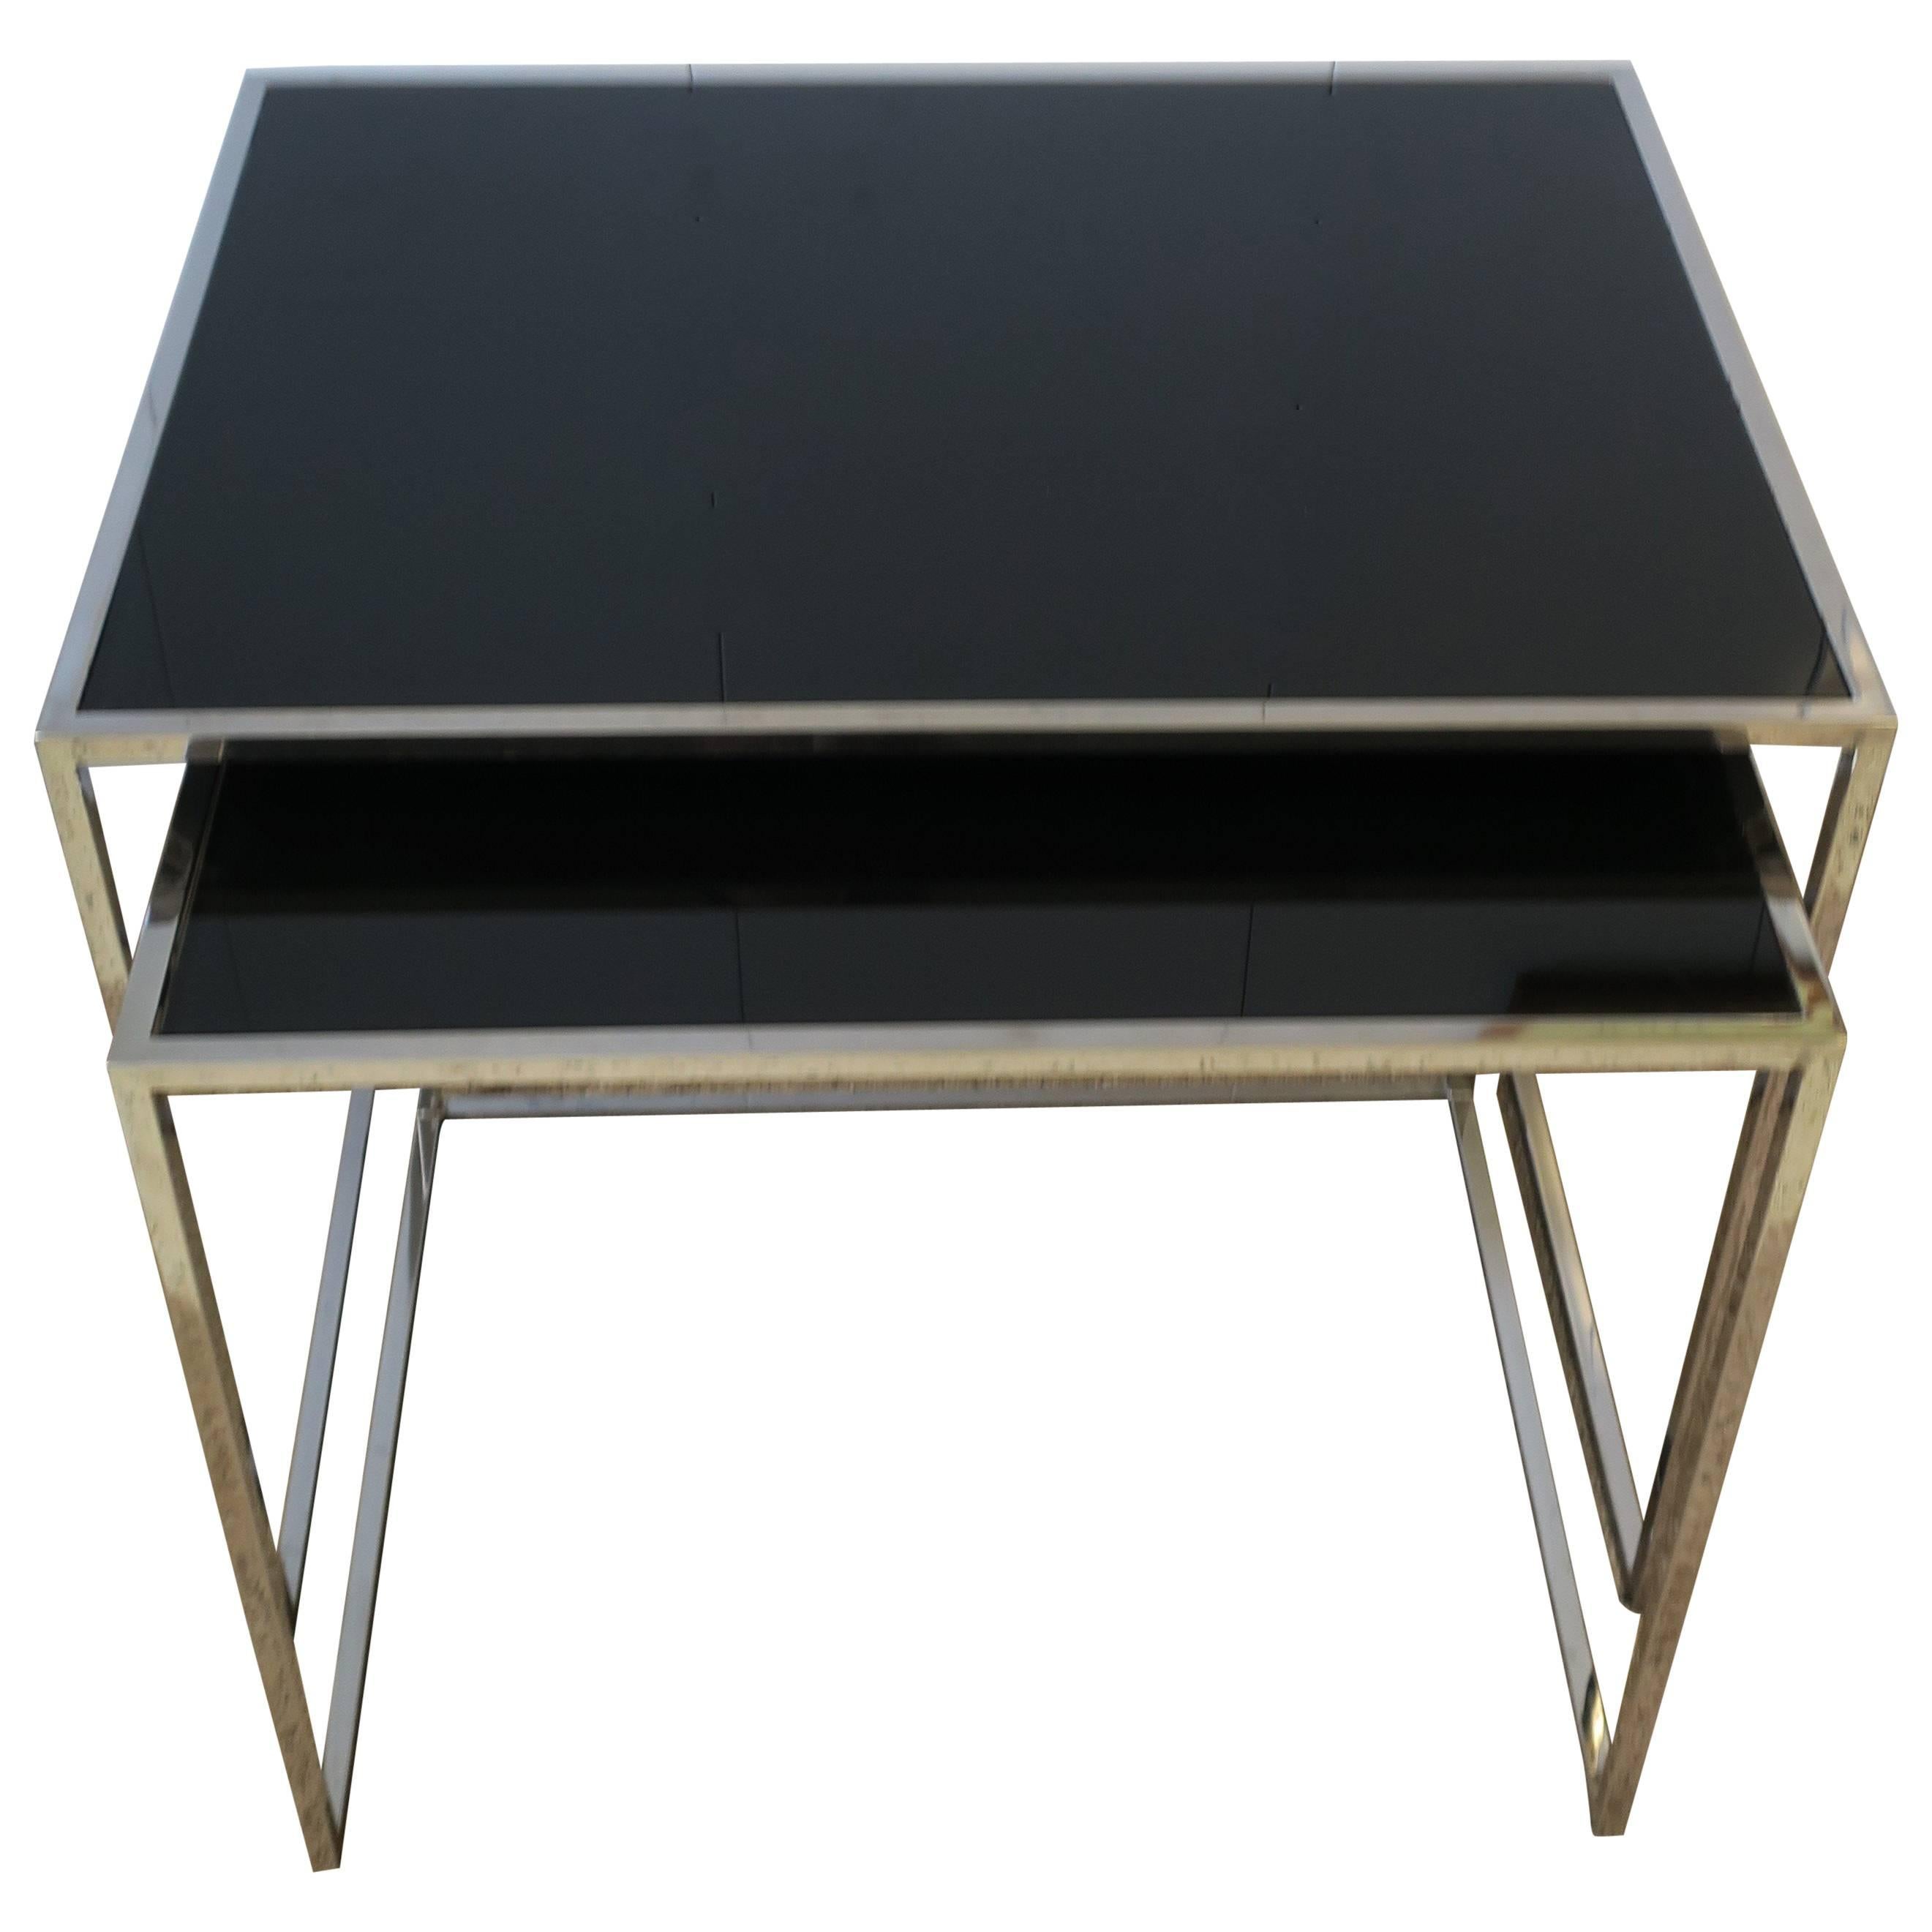 Minimalist Chrome and Black Glass Nesting or End Tables